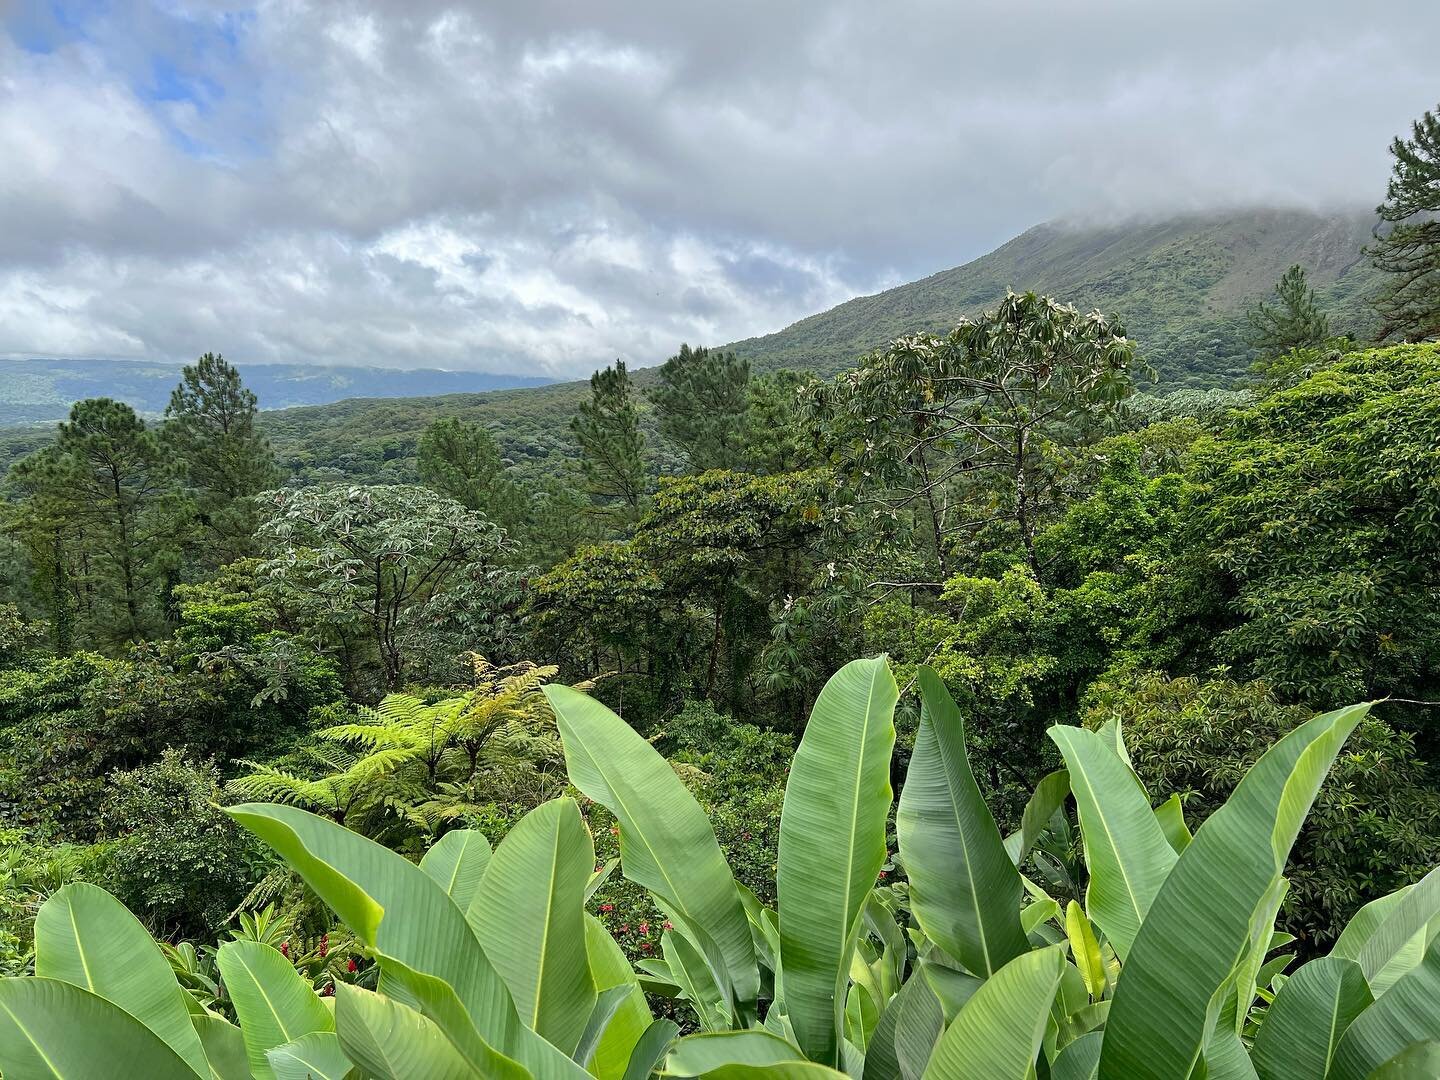 Today has been incredible.

Hiking in the rainforest, three waterfalls all to ourselves, tons of birds, a bird&rsquo;s eye view from &ldquo;the nest,&rdquo; volcanos, downpours, sunshine, everything in between, good music, good food, and just a wonde